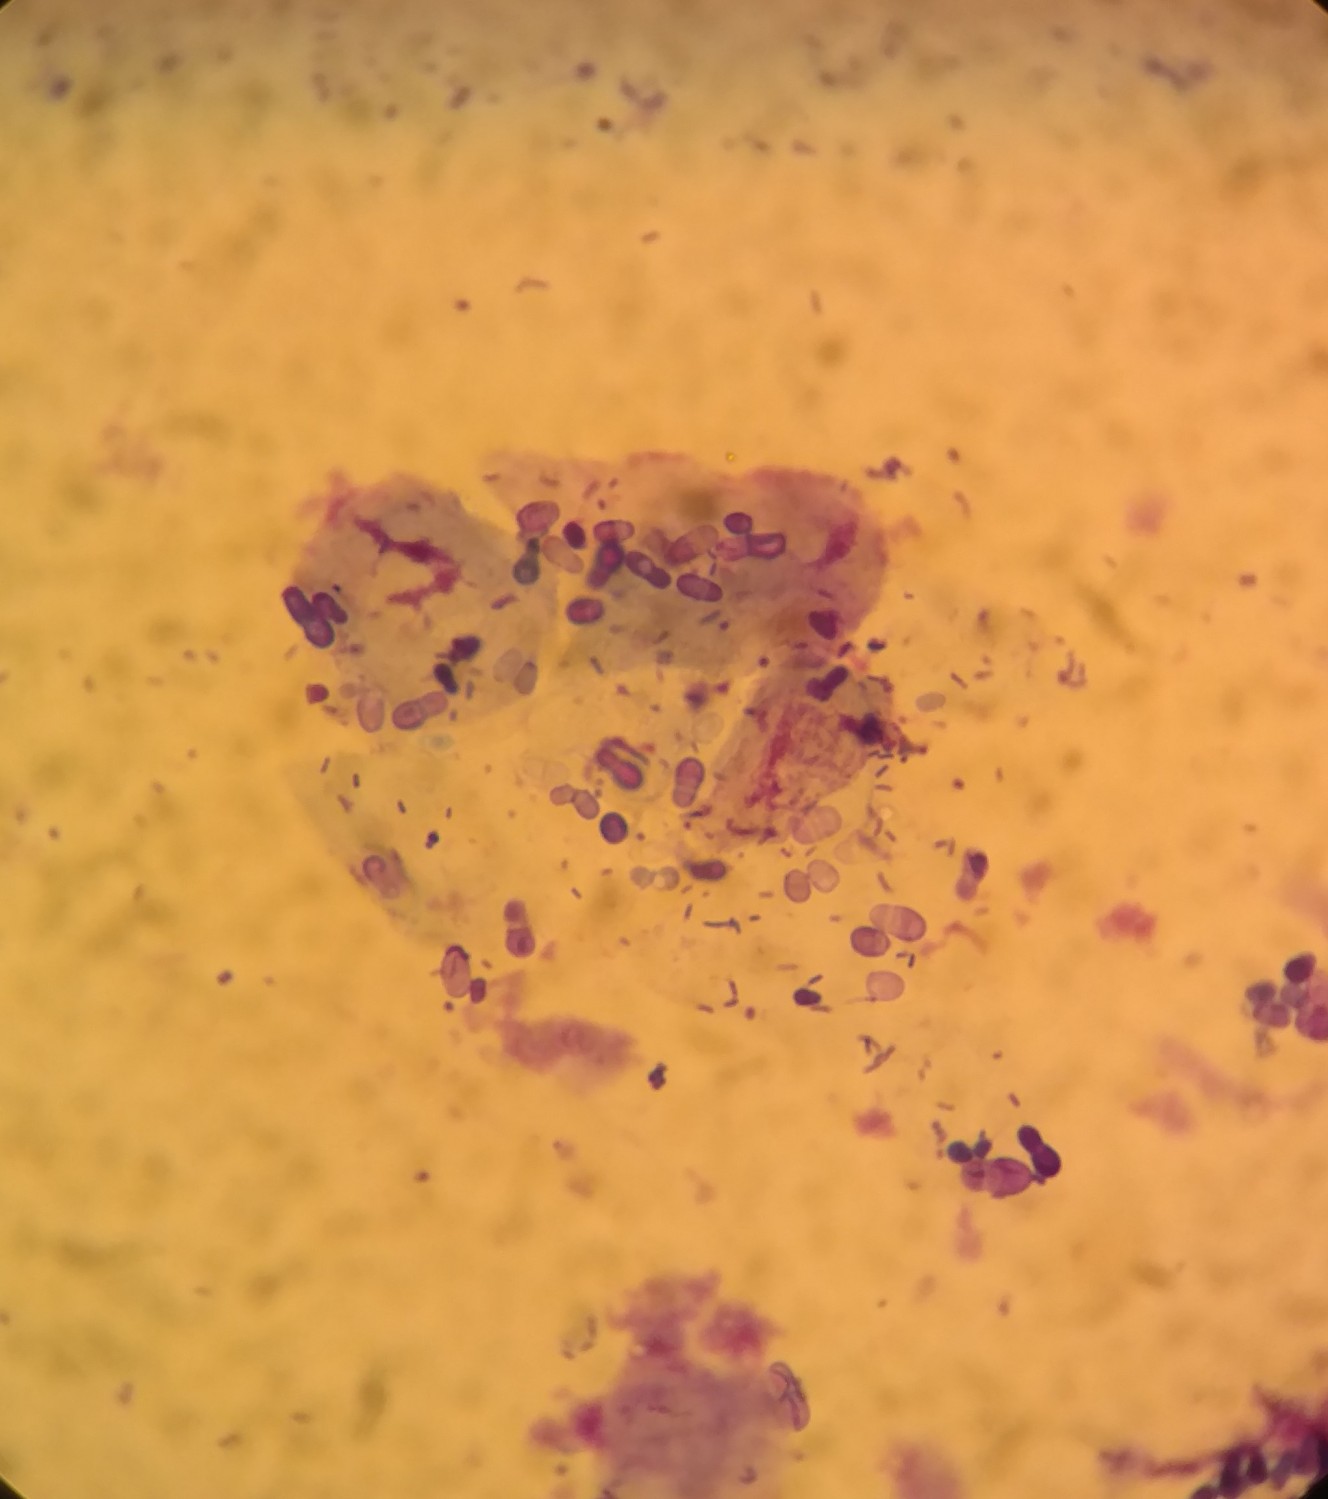 both ear cytology samples showing yeast overgrowth